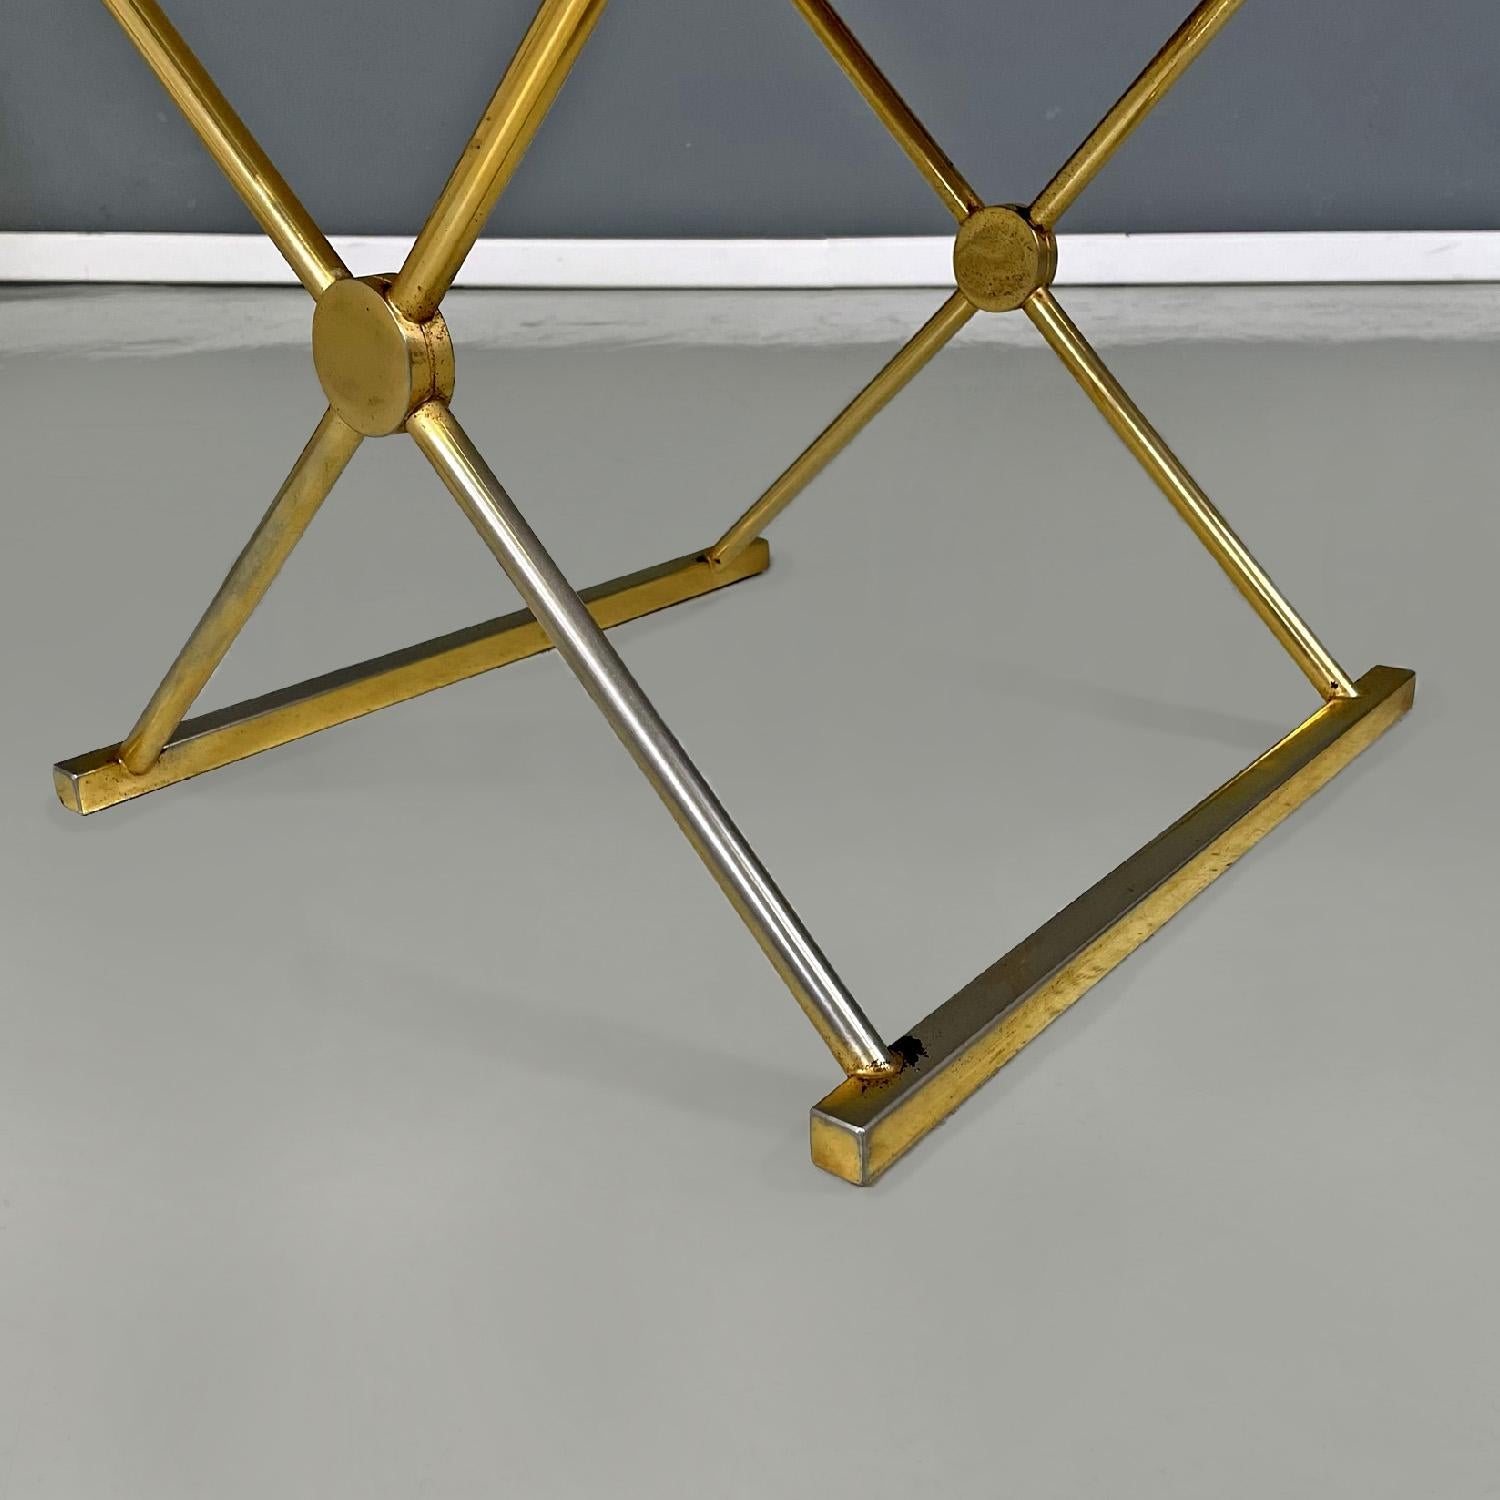 Italian modern stools in golden metal and white fabric, 1980s For Sale 2